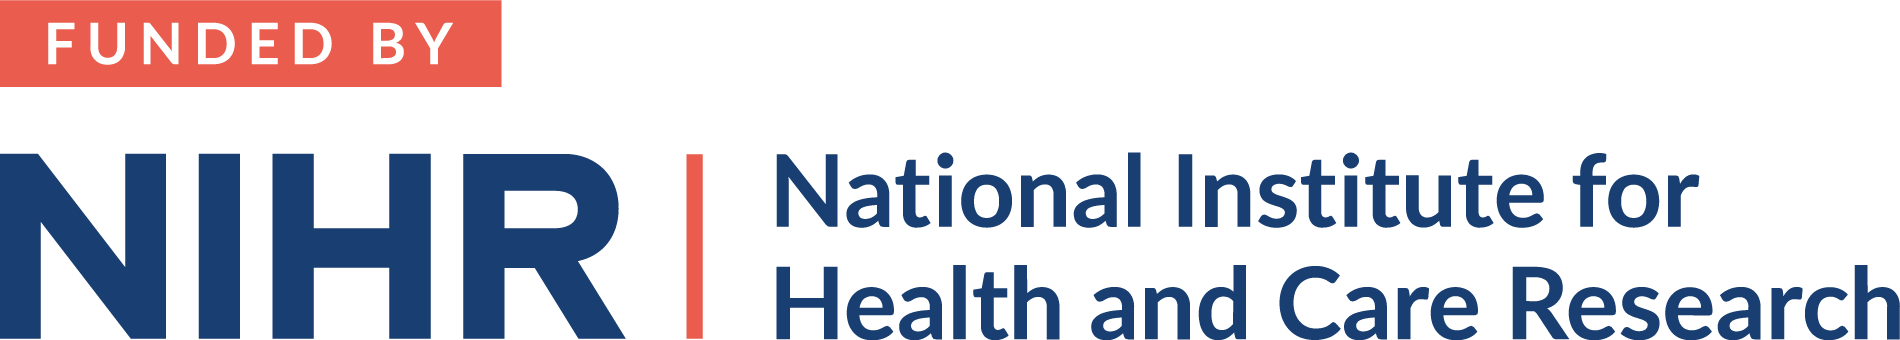 Funded by NIHR - National Institute for Health and Care Research